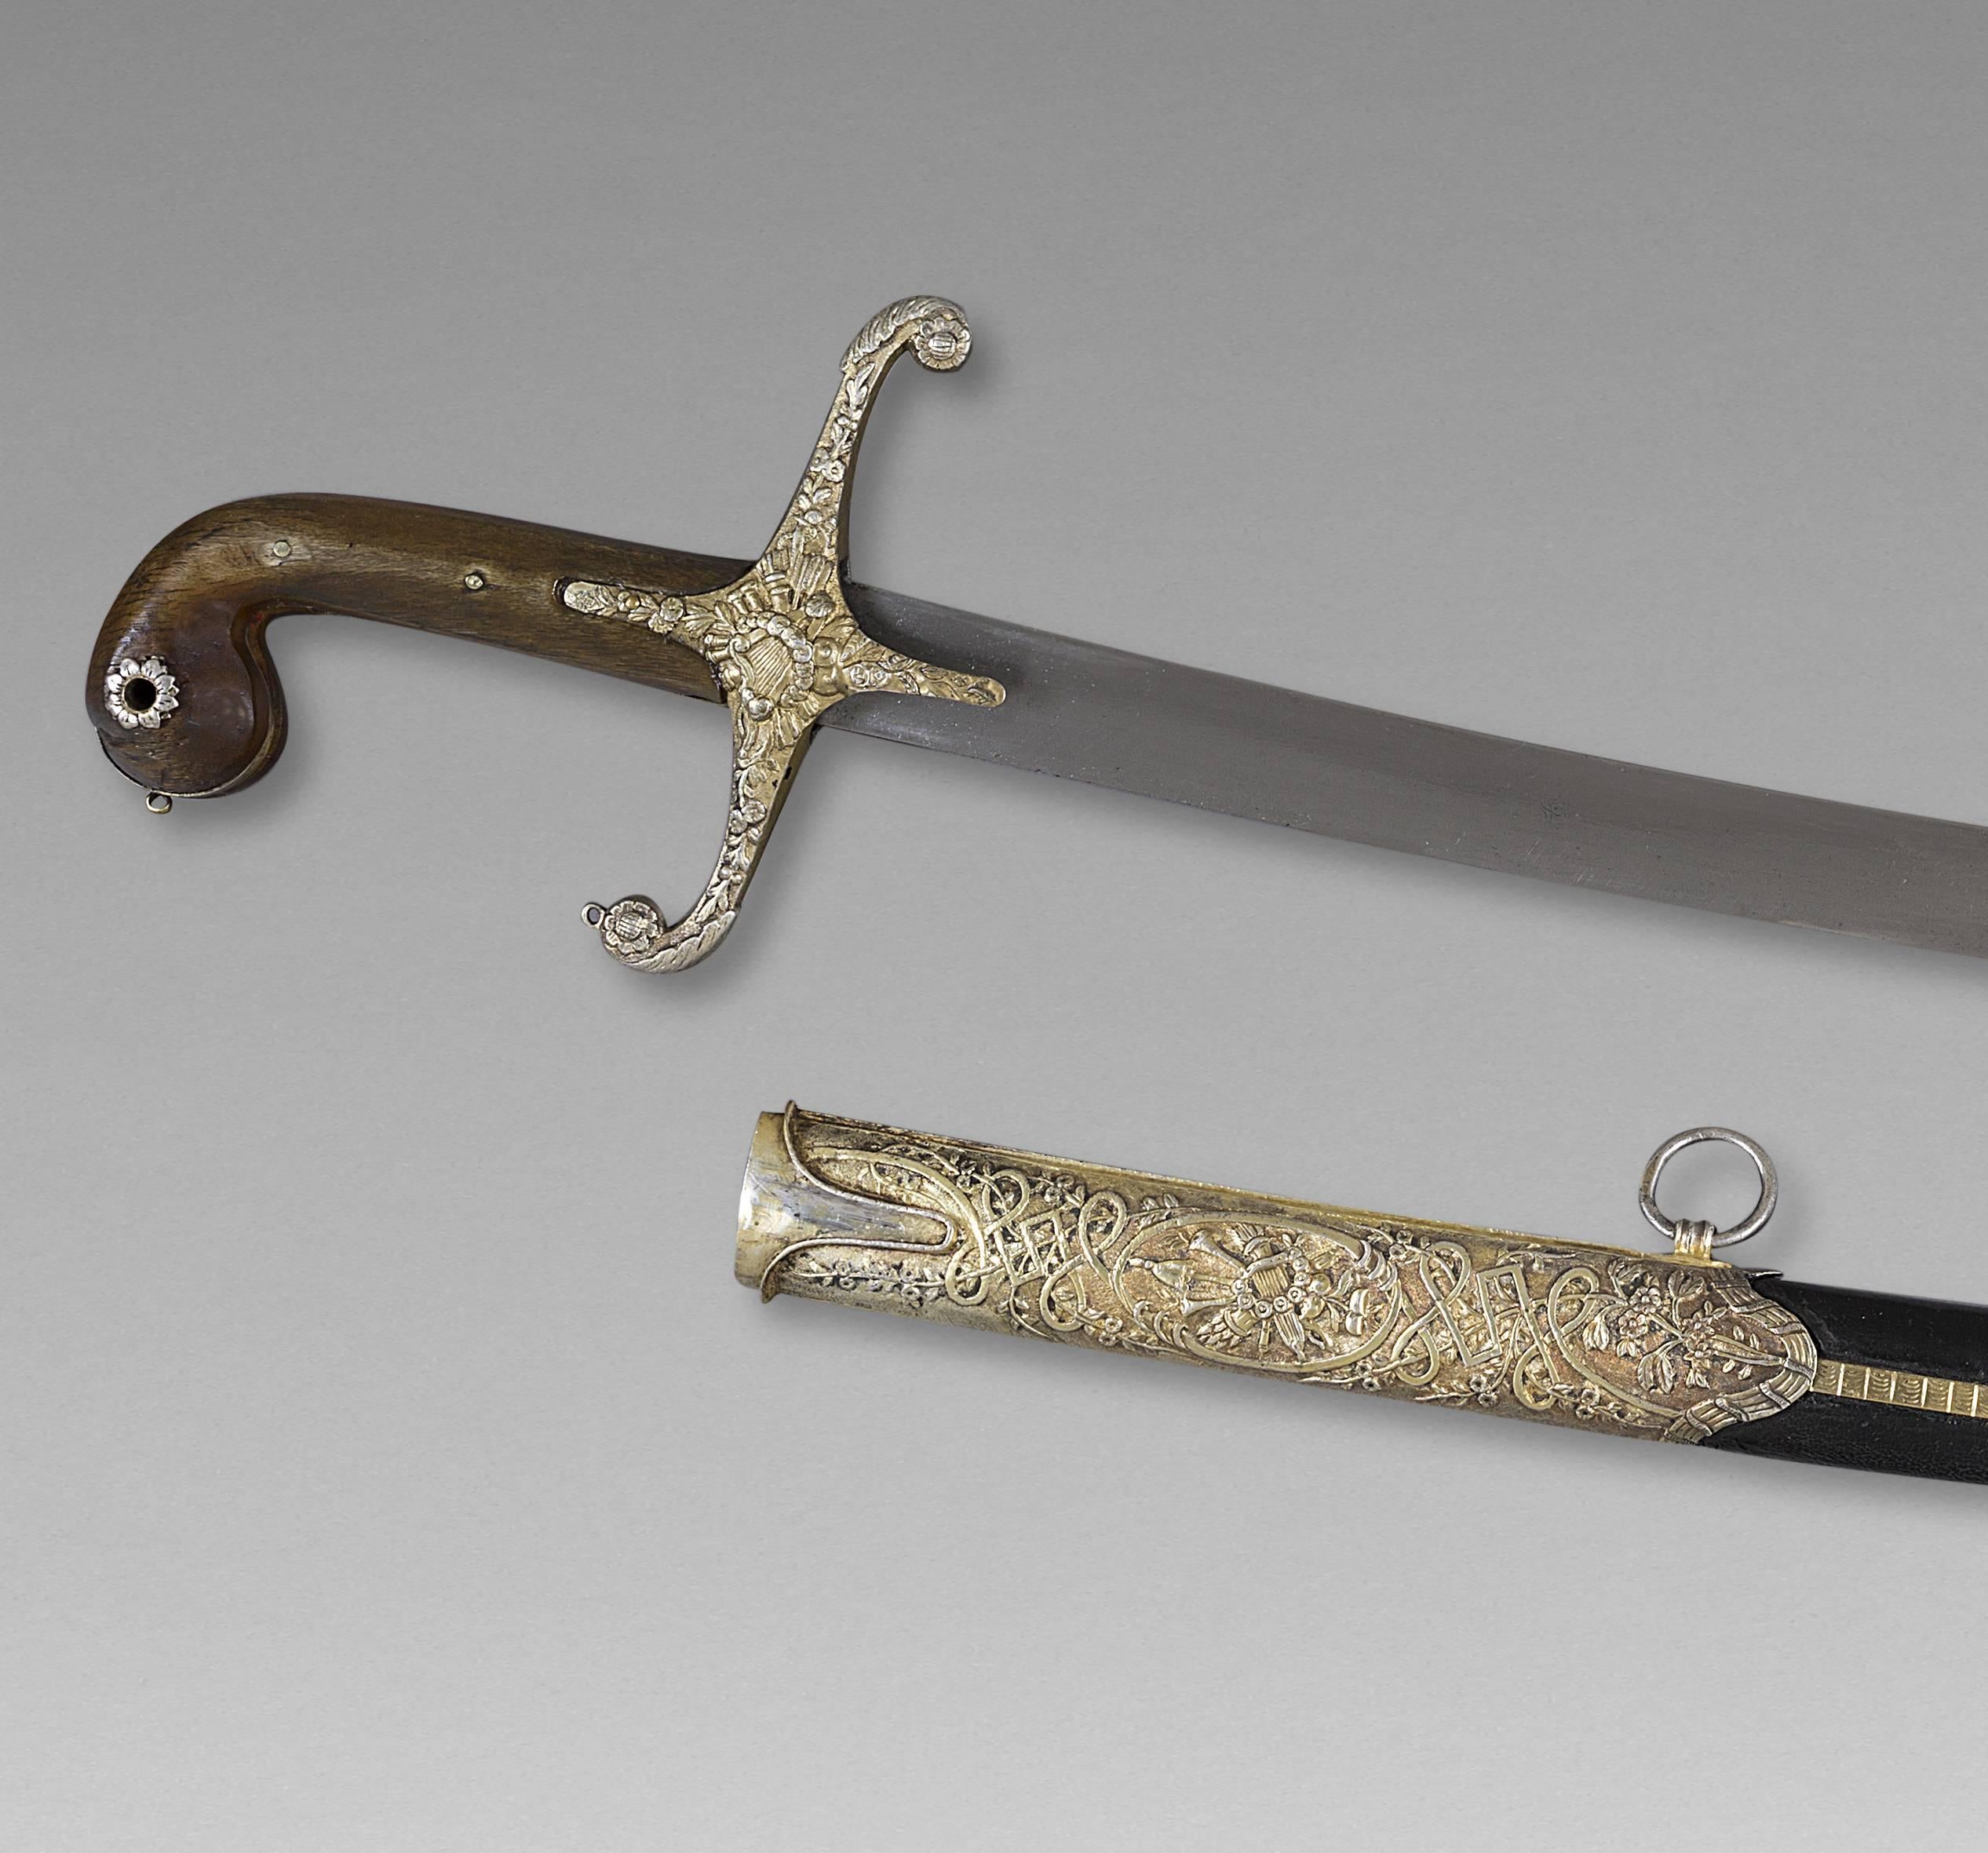 Oriental saber, also called Killich
Ottoman Empire, late 18th century

Handle in horn, silver mounted, Damascus blade, scabbard garnished of black leather.

Measure: Whole saber 40